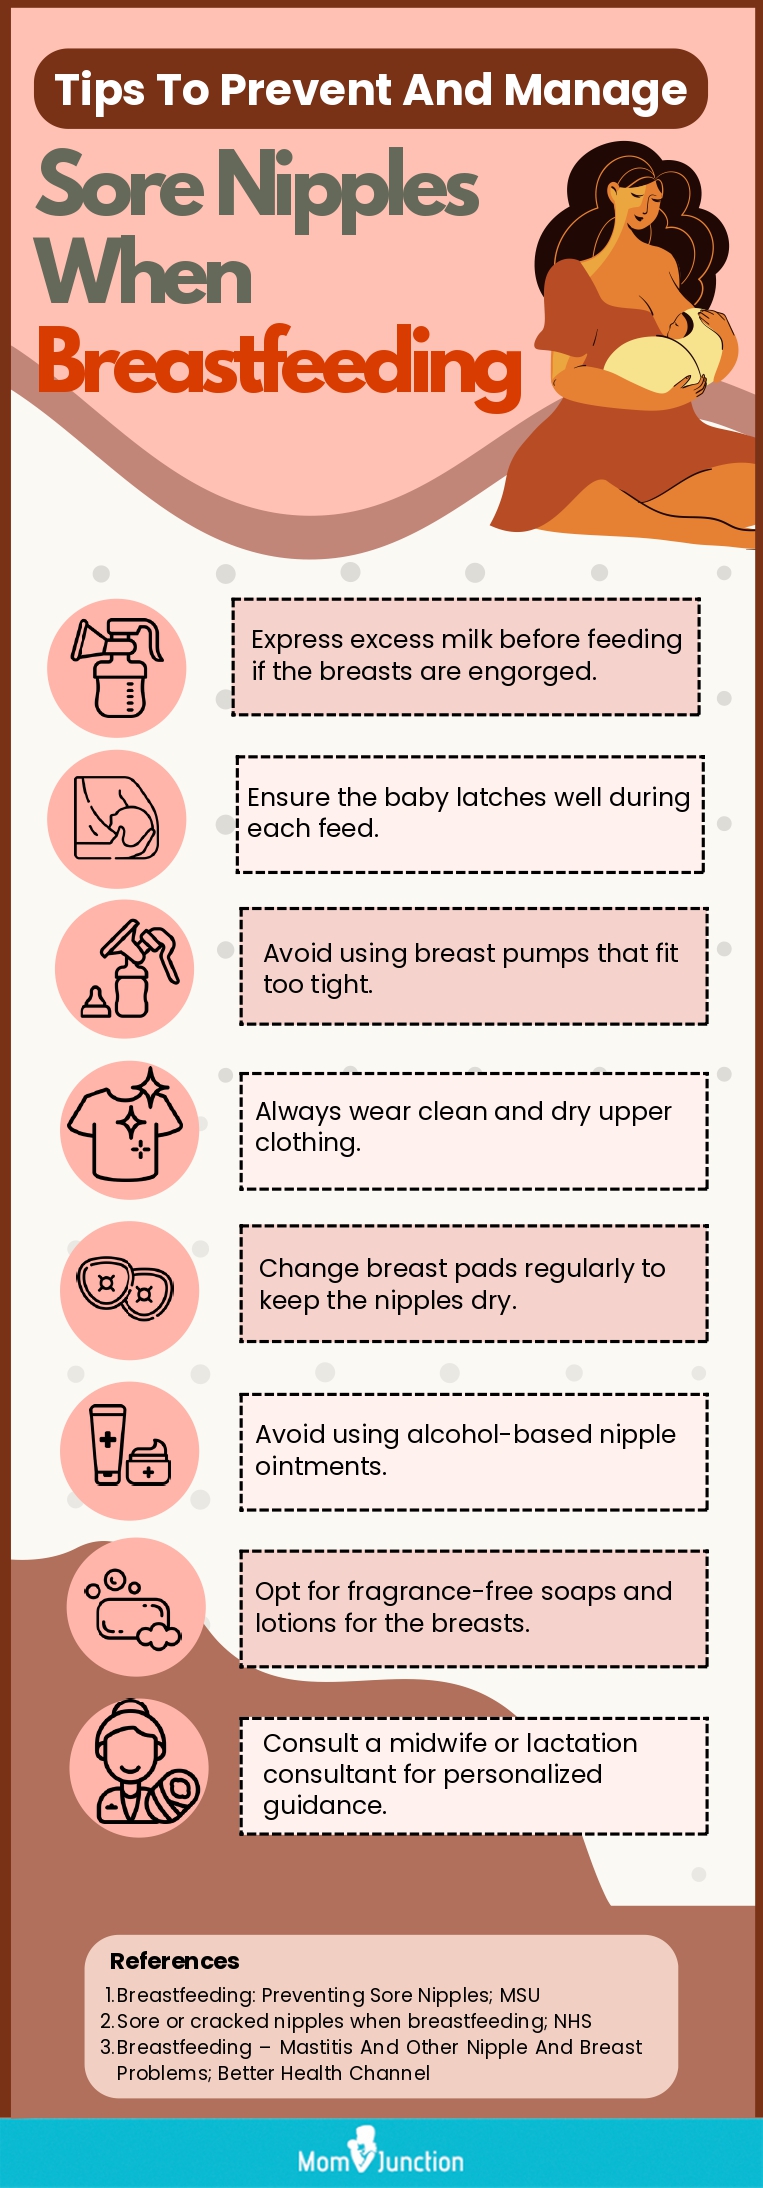 Tips To Prevent And Manage Sore Nipples When Breastfeeding (infographic)